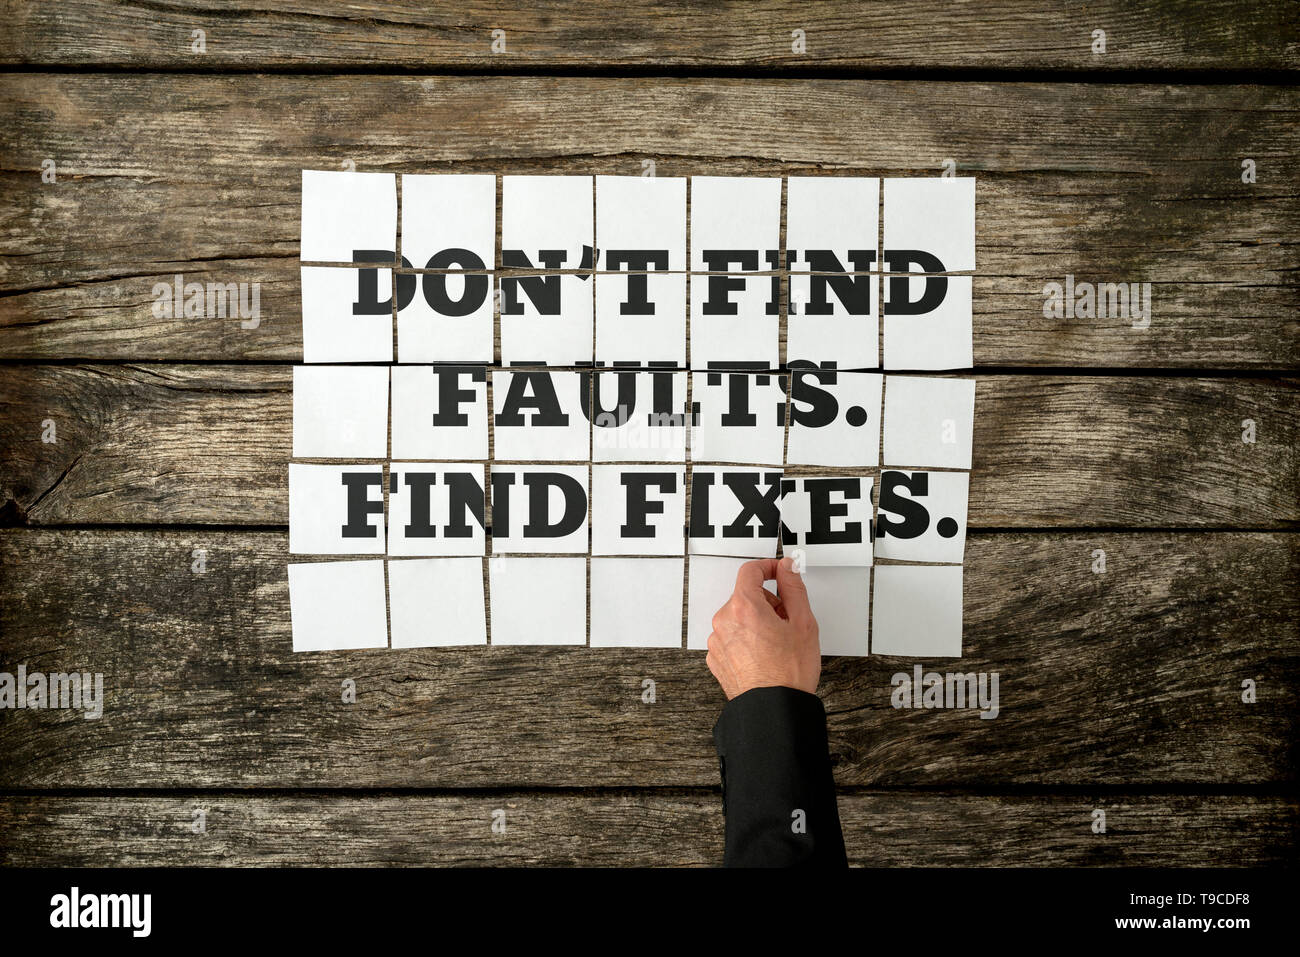 Top view of male hand assembling a Don't find faults. Find fixes sign with white cards over a textured rustic wooden boards. Stock Photo